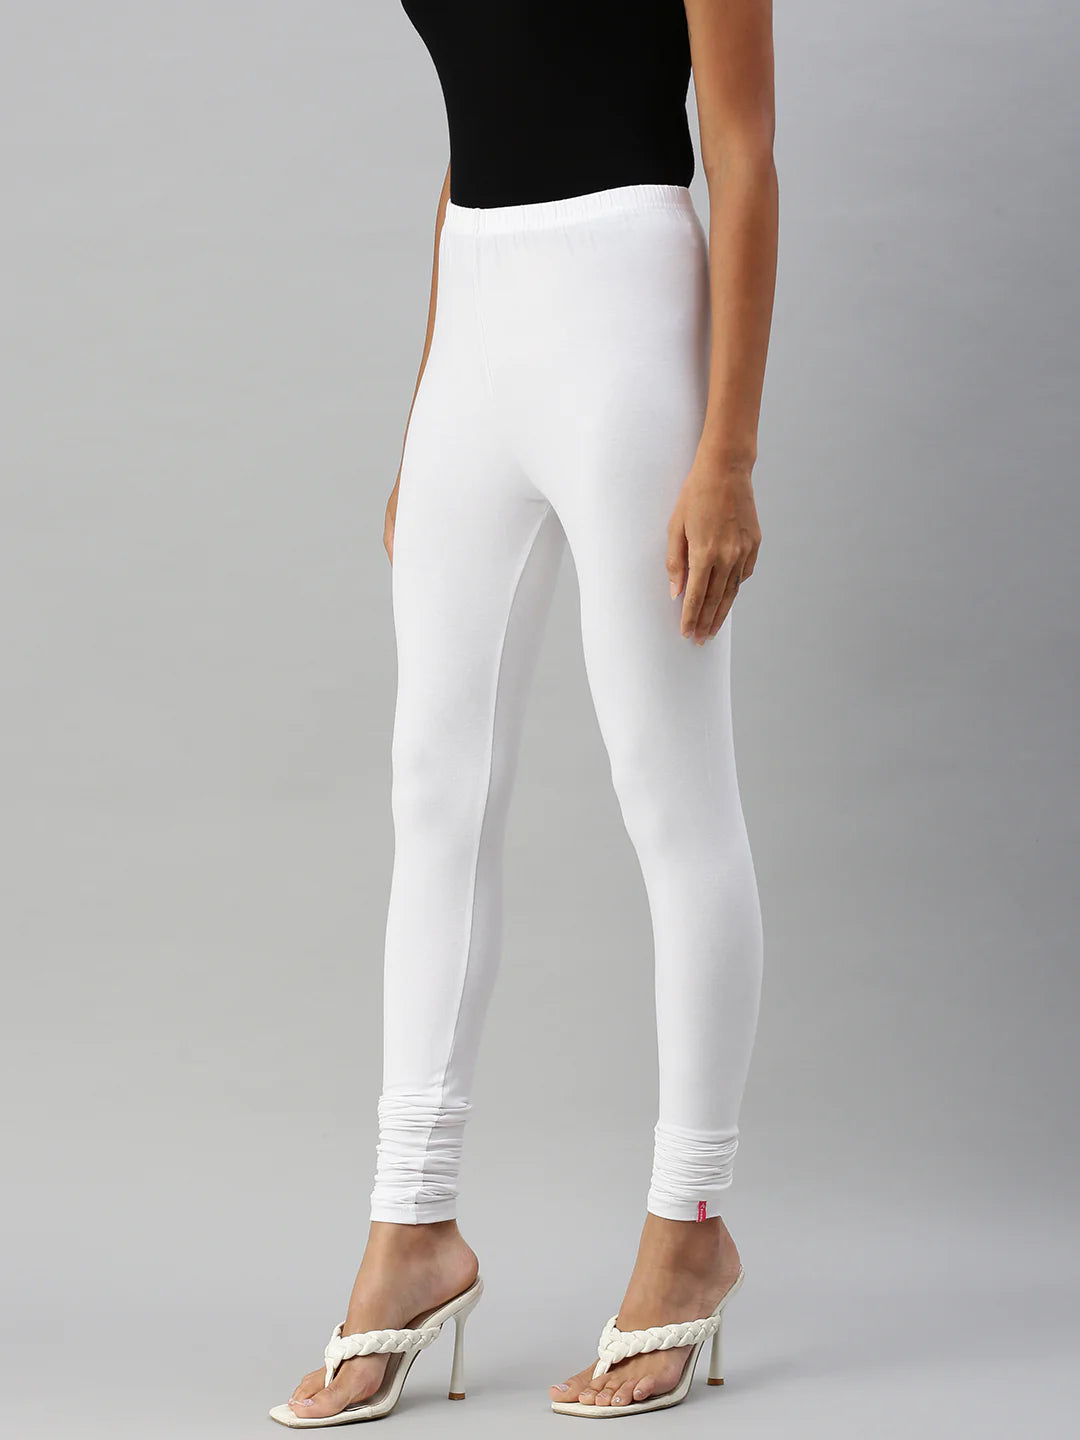 Buy Prisma Leggings White - High Quality, Perfect Fit, Fast